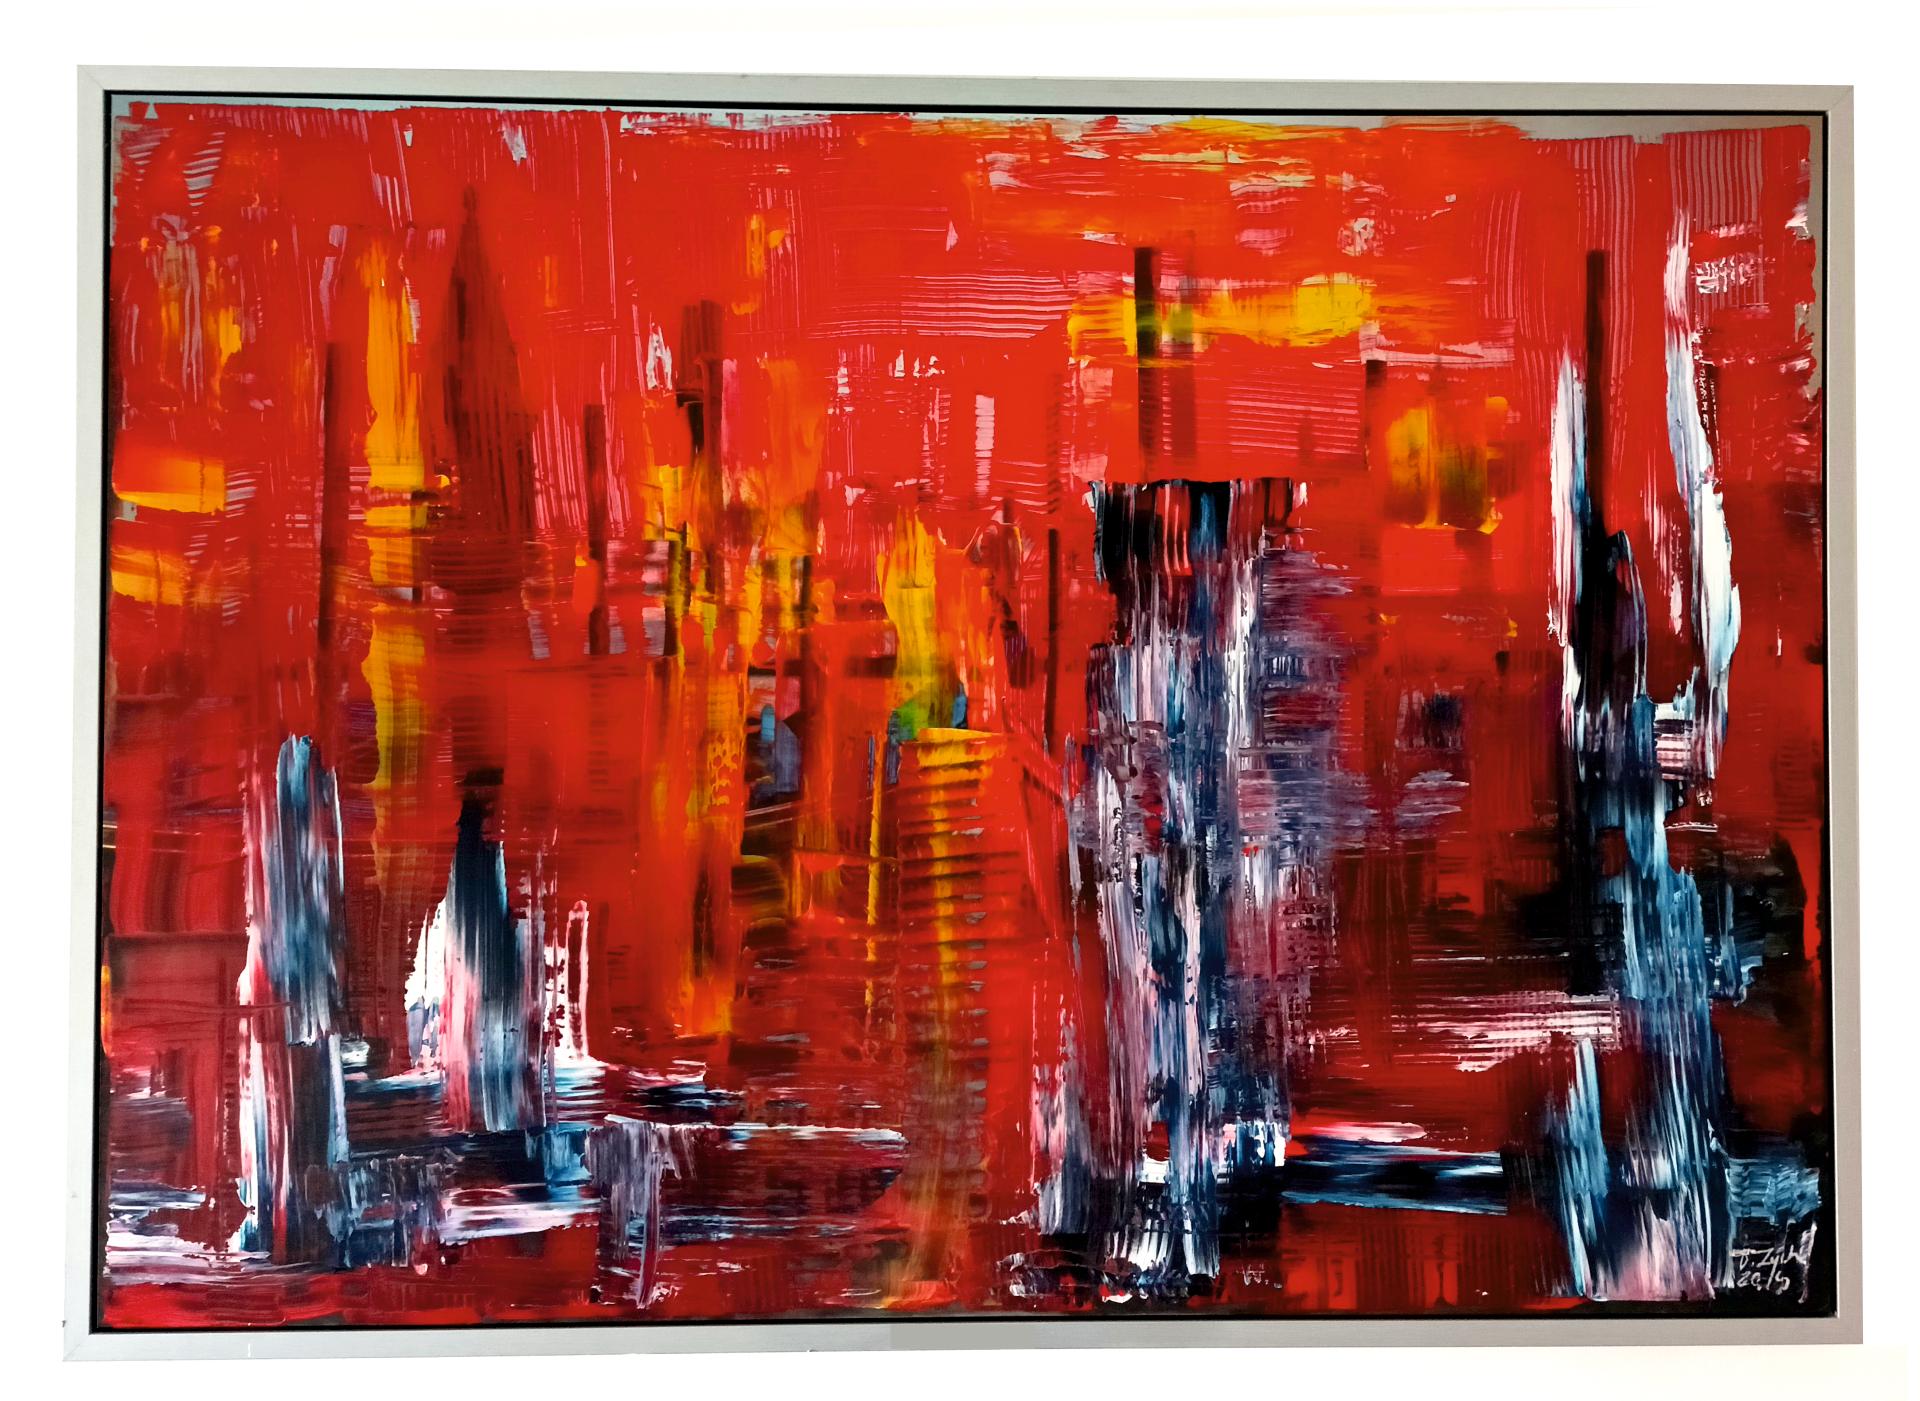 Venice. One of the paintings inspired by a stay in a given city while traveling around Italy. Italian cities series.
Each city visited created one work of abstract art, full of expression and energy.
An image full of expression and energy.
Abstract